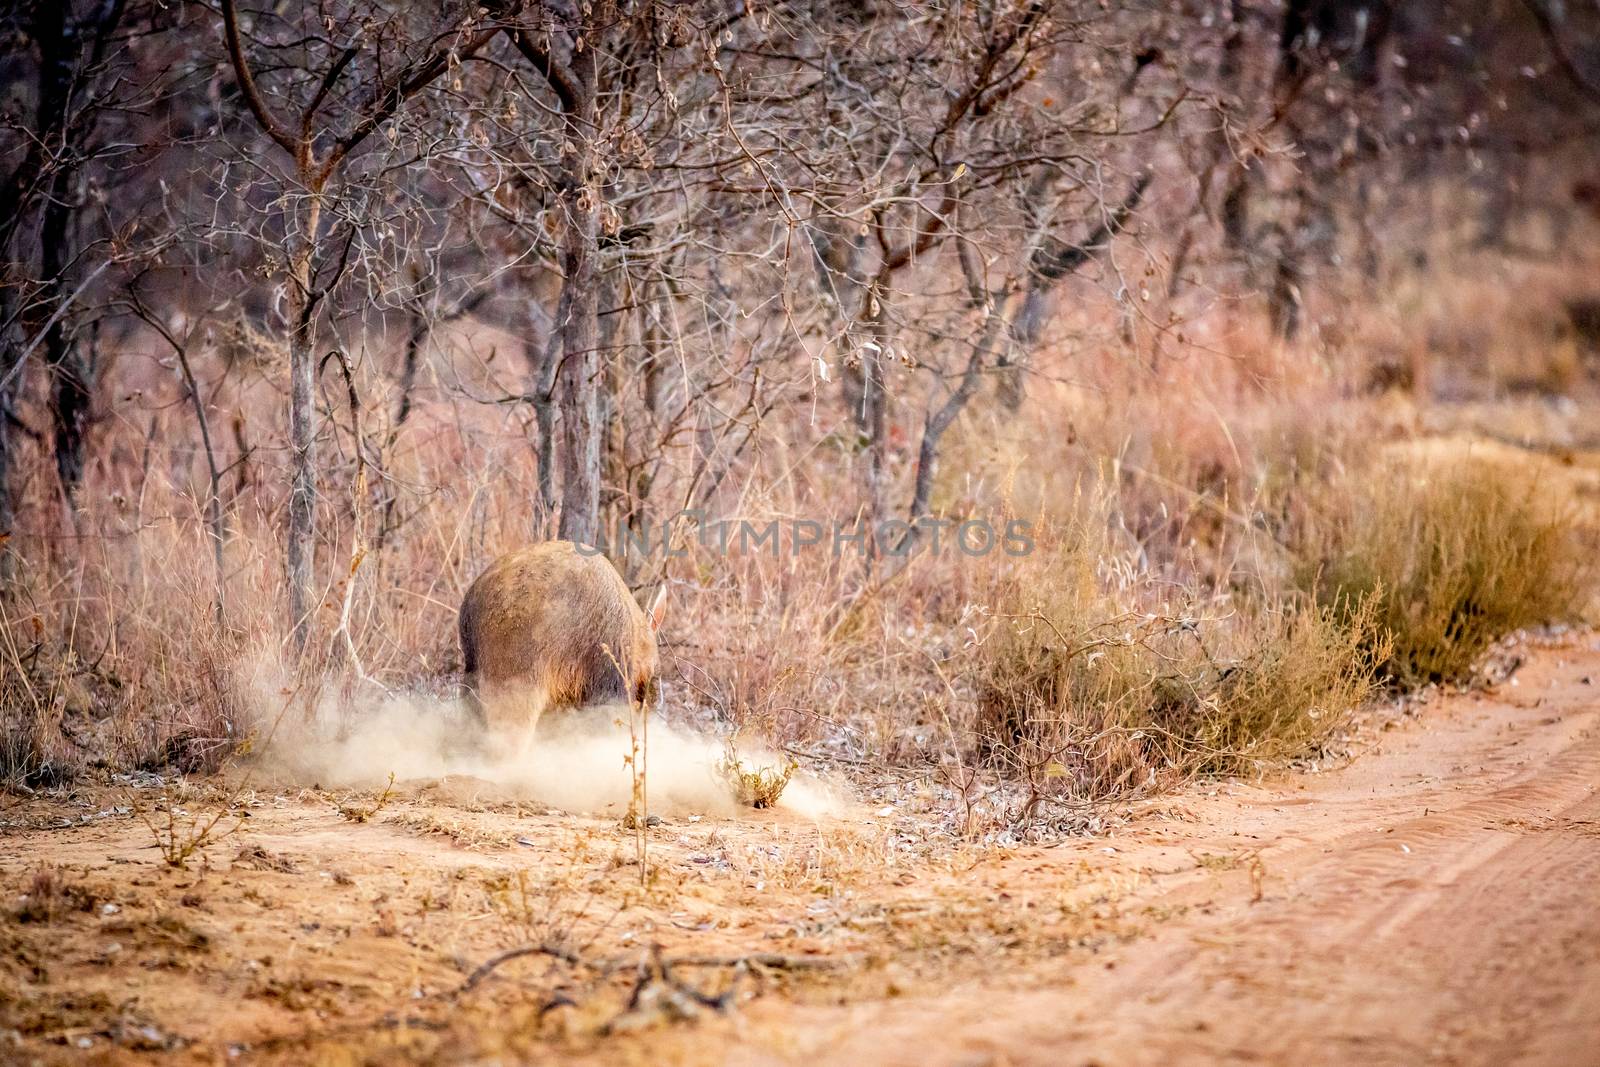 Aardvark foraging for ants in the bush. by Simoneemanphotography